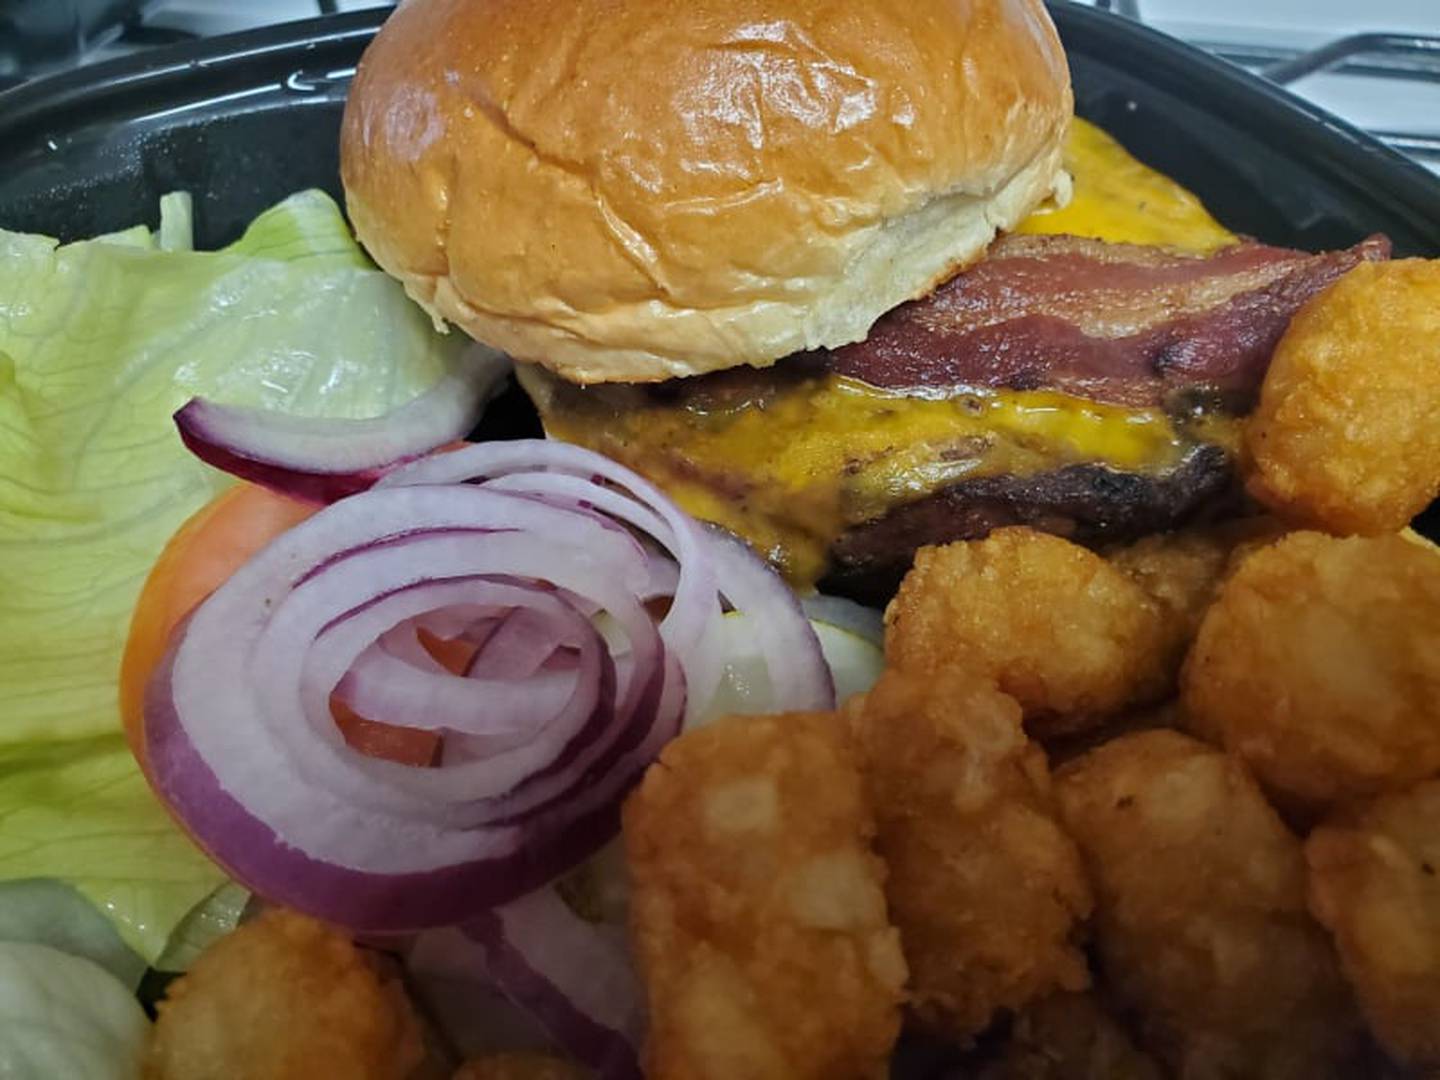 Jameson's Pub in Joliet has a bacon cheddar burger for $19 and a side of tater tots for $2. The veggies were placed on the side and remained crisp.